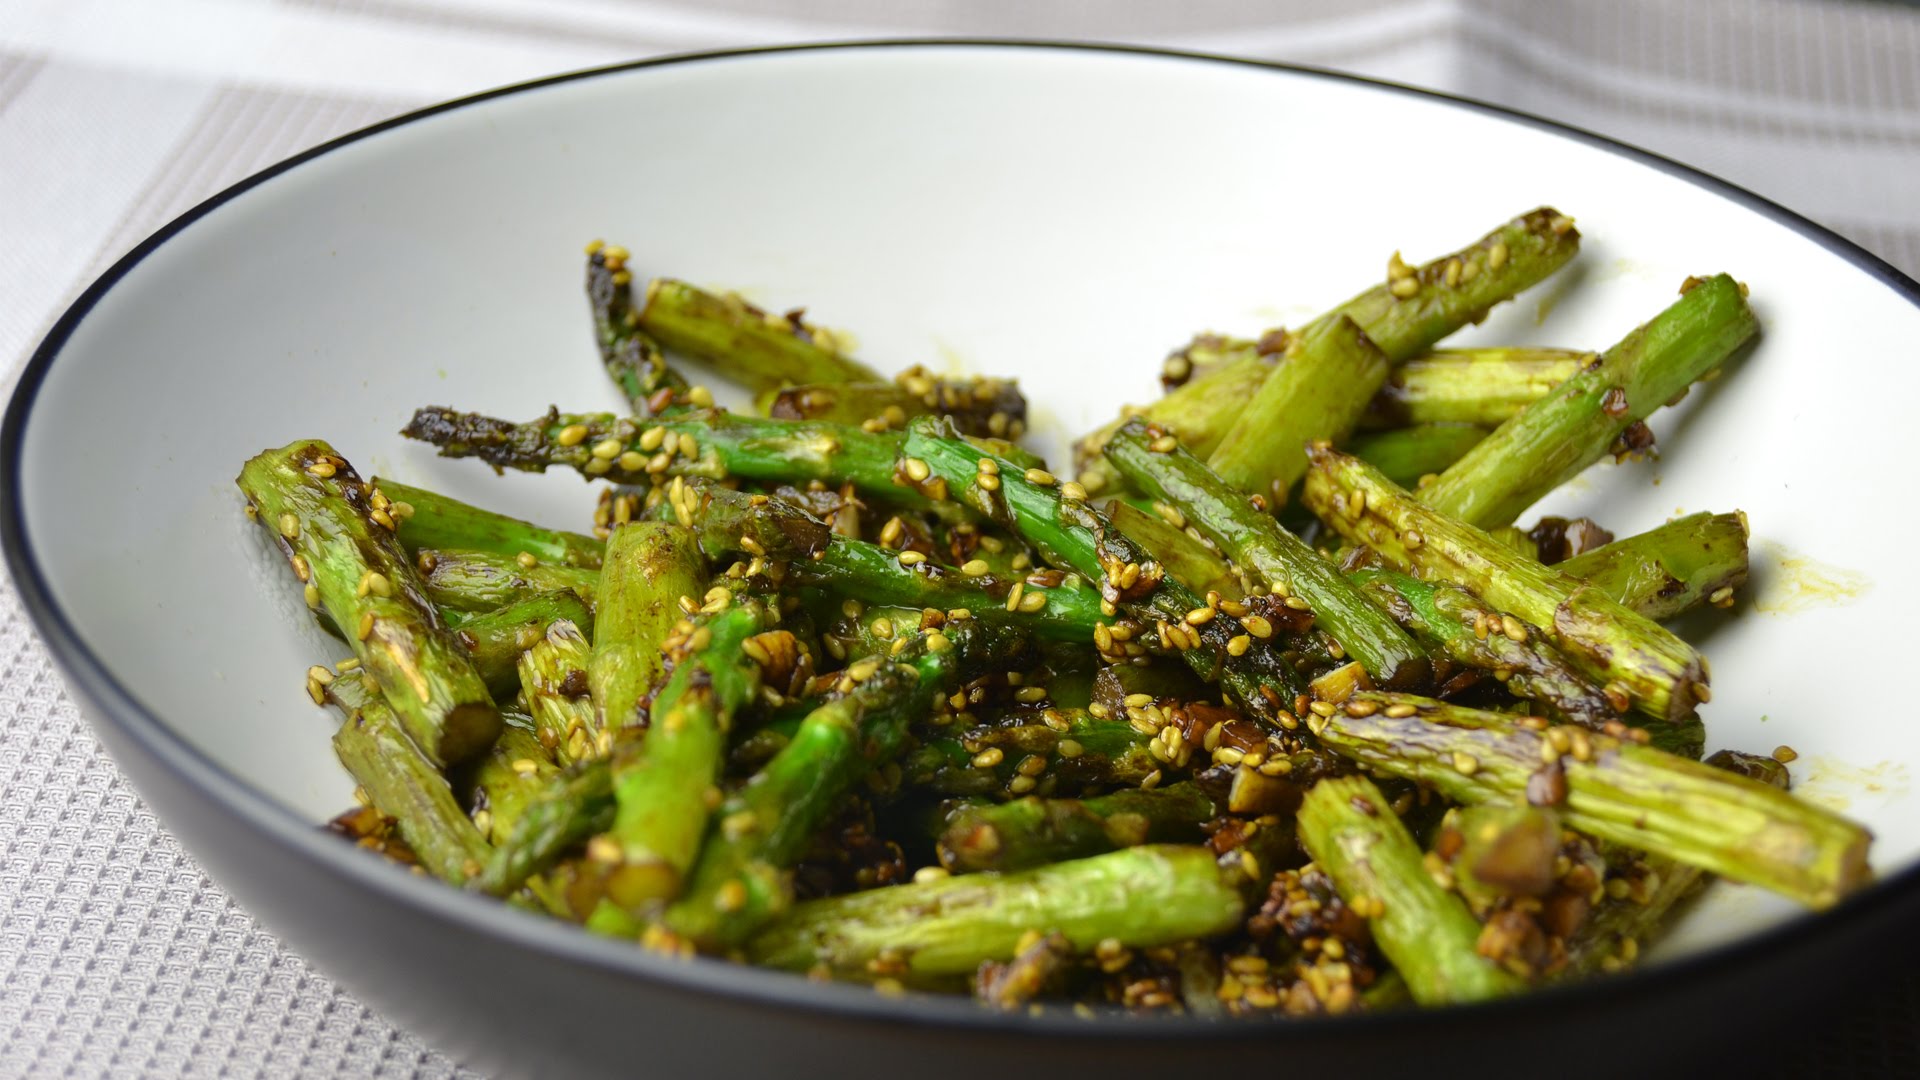 Espárragos Trigueros (fried asparagus) is an example of traditional Spanish cooking